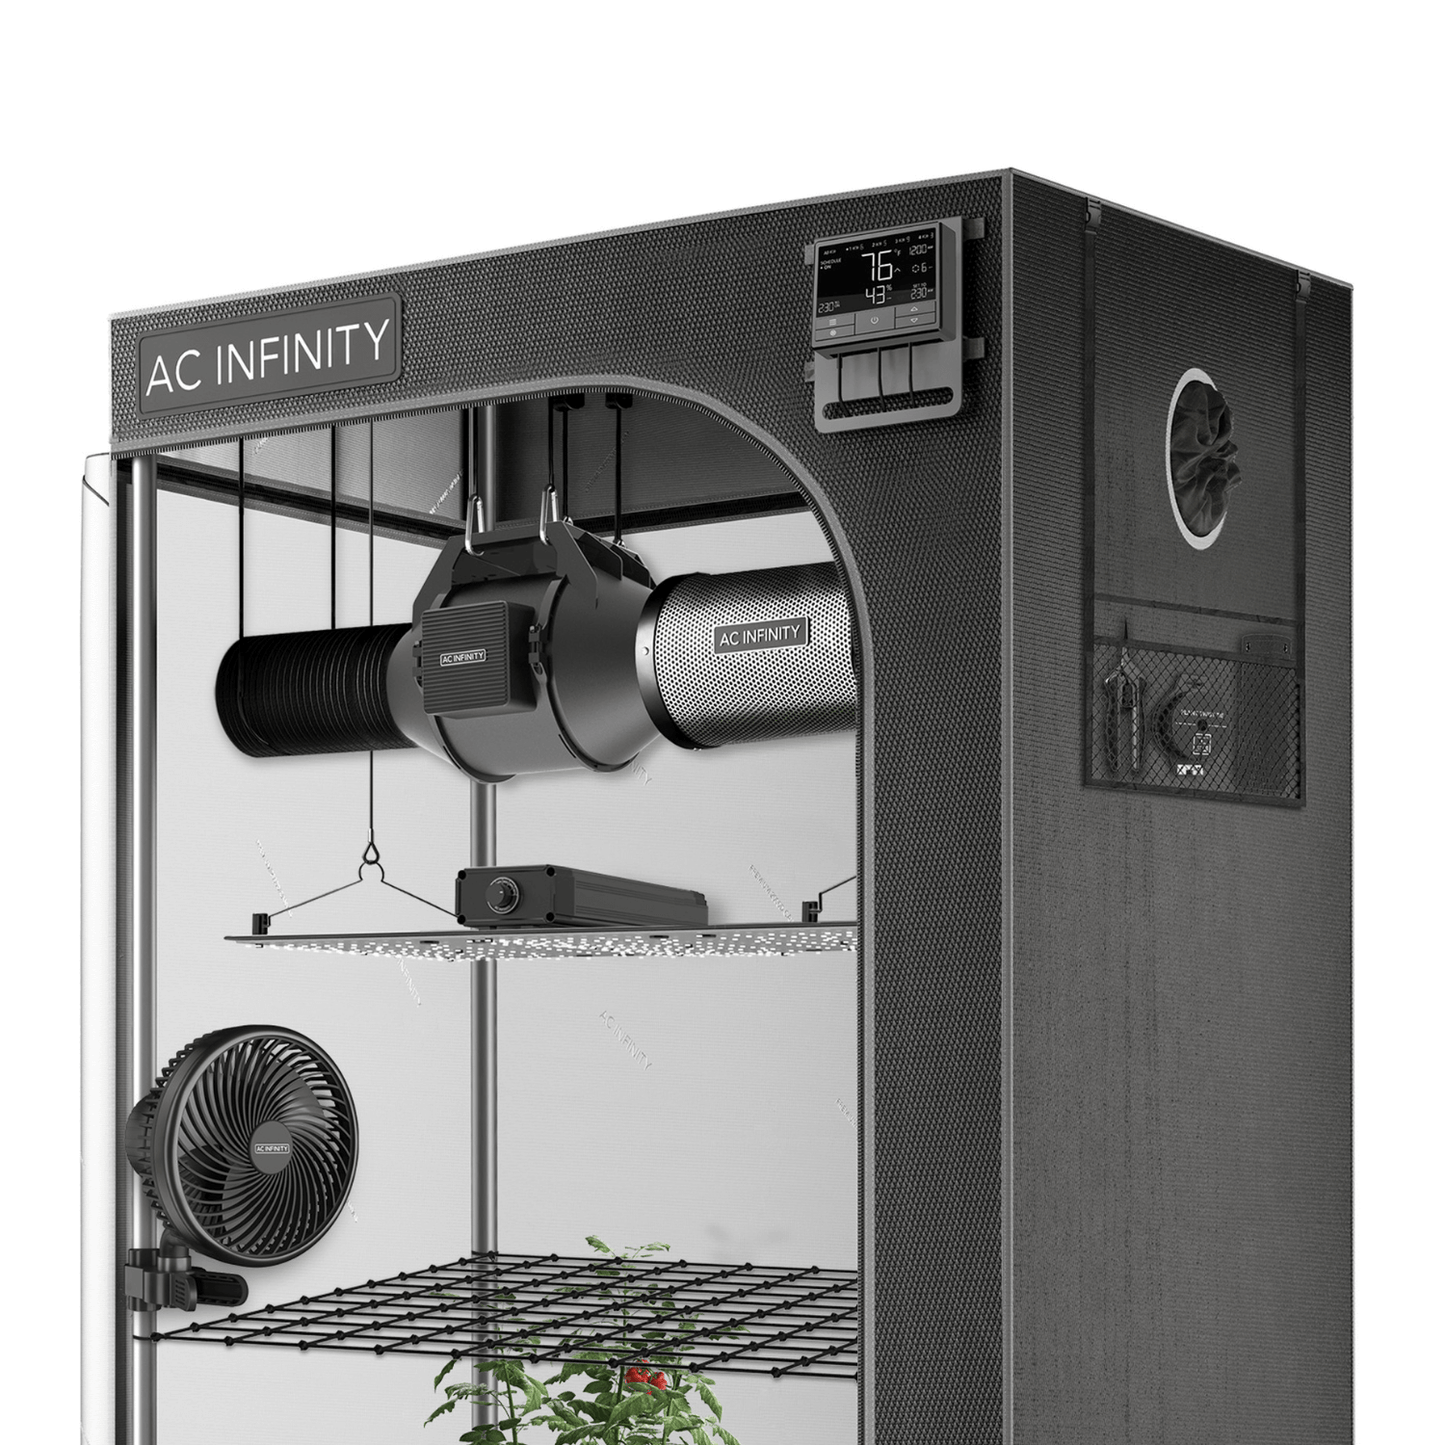 AC Infinity Advance Grow Tent System 2x4, 2-Plant Kit, Integrated Smart Controls to Automate Ventilation, Circulation, Full Spectrum LED Grow Light AC-PKB24 Kits 819137022843